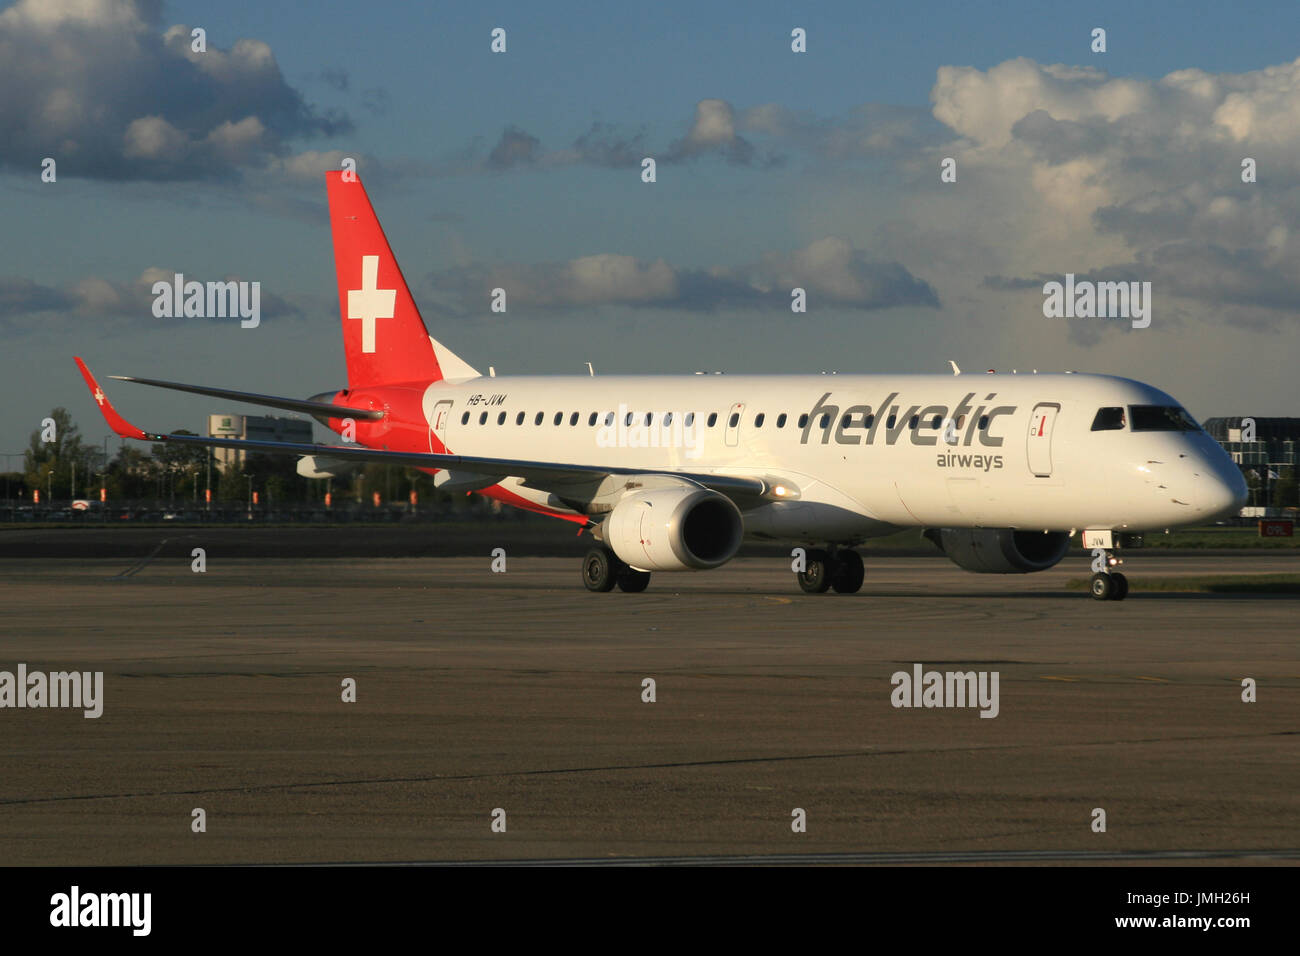 HELVETIC EMBRAER Stock Photo